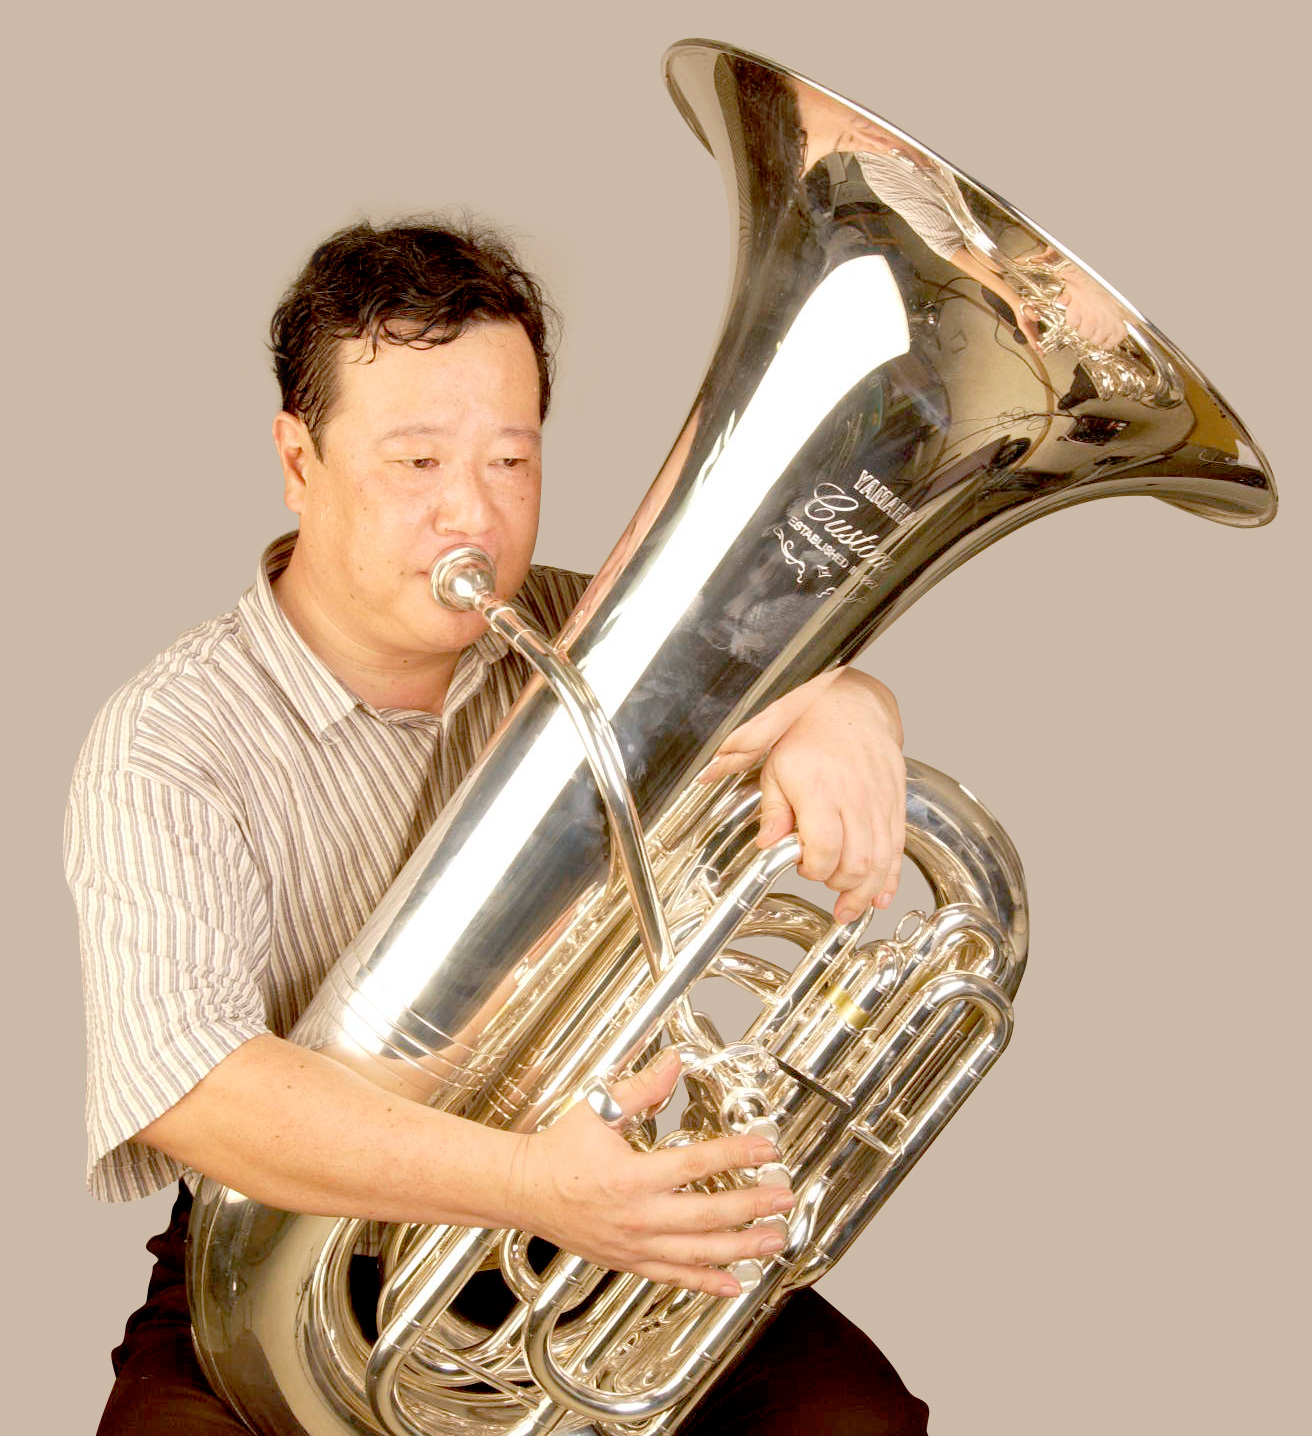 Front-action tubas have the bell on the player's left side